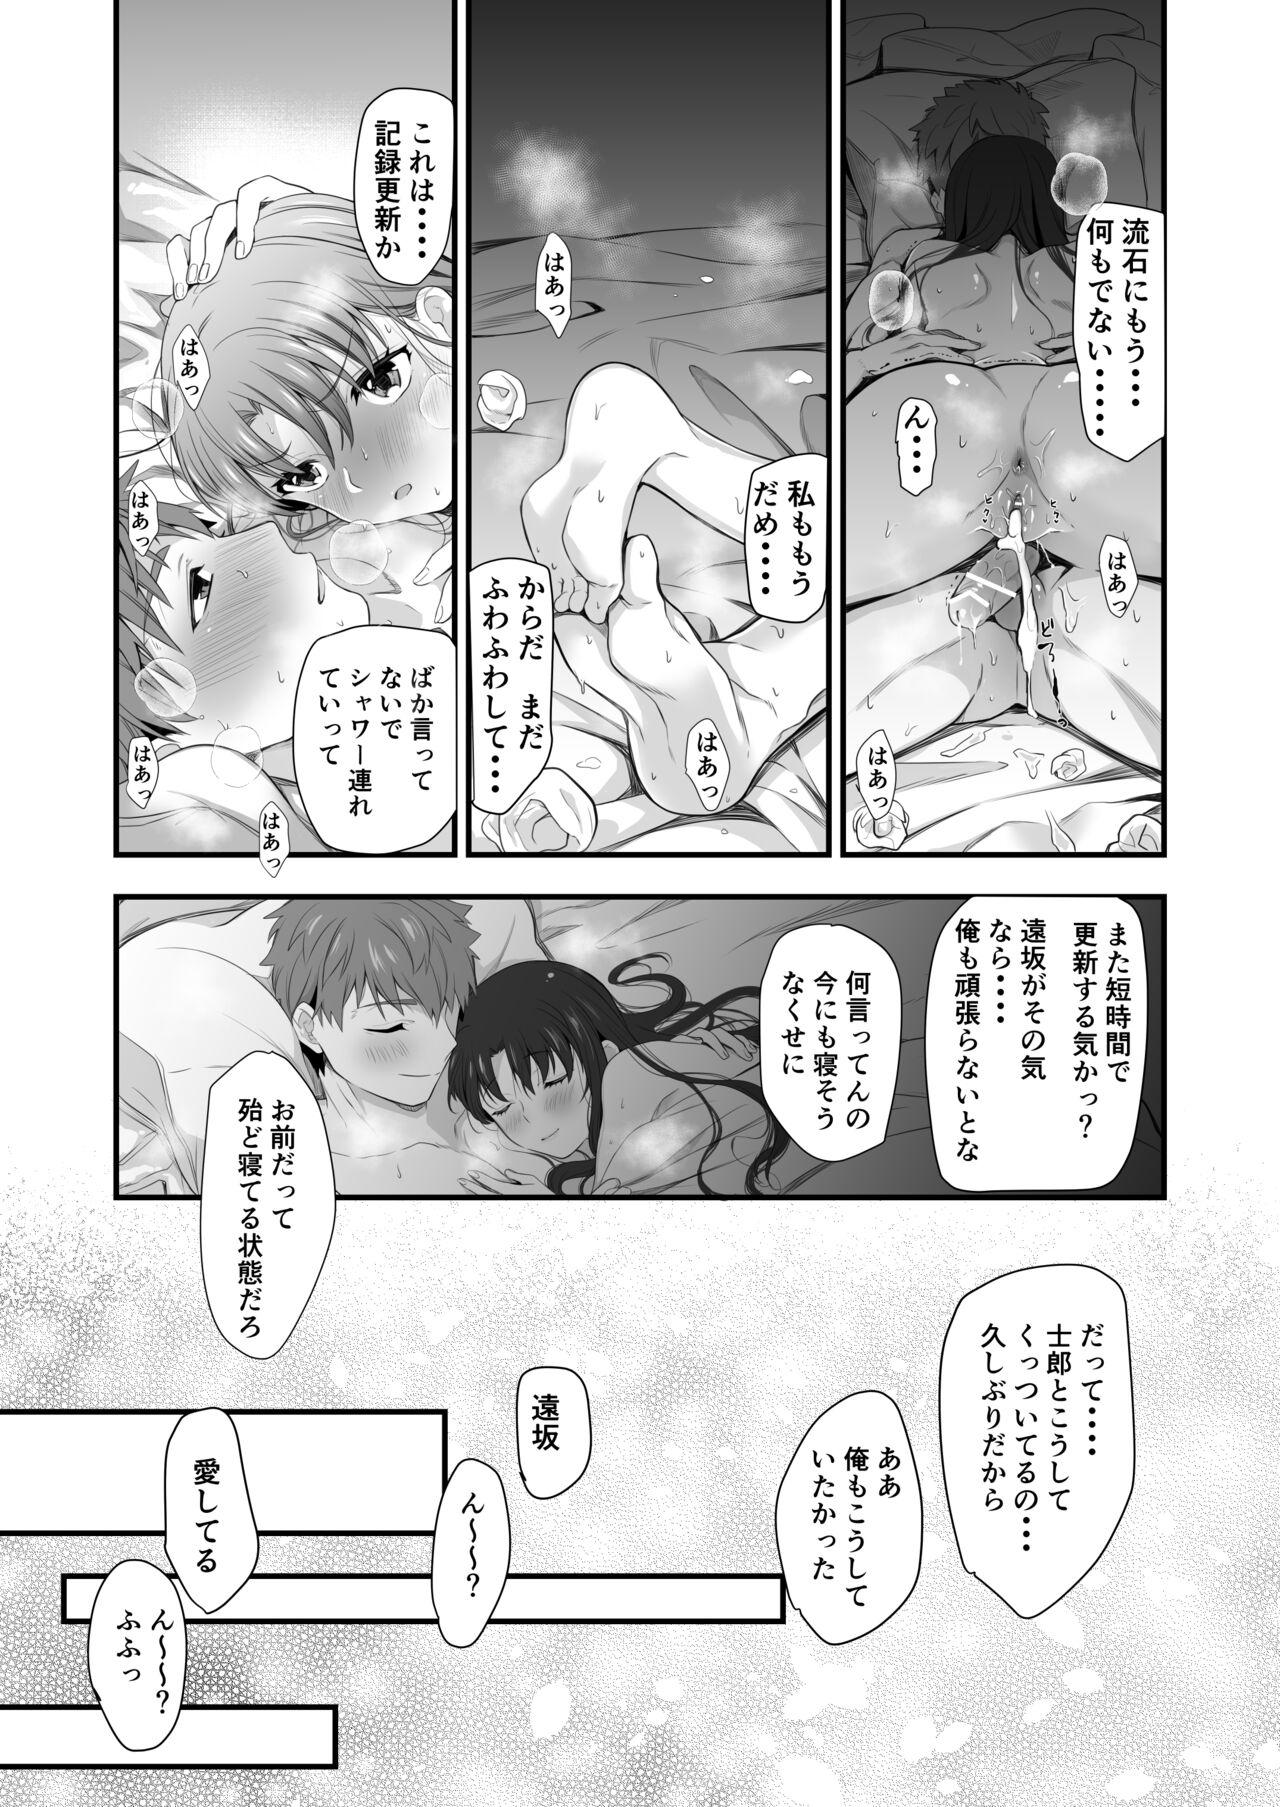 Sex Toys 酒は呑んでも呑まれるな - Fate stay night Rubia - Page 27